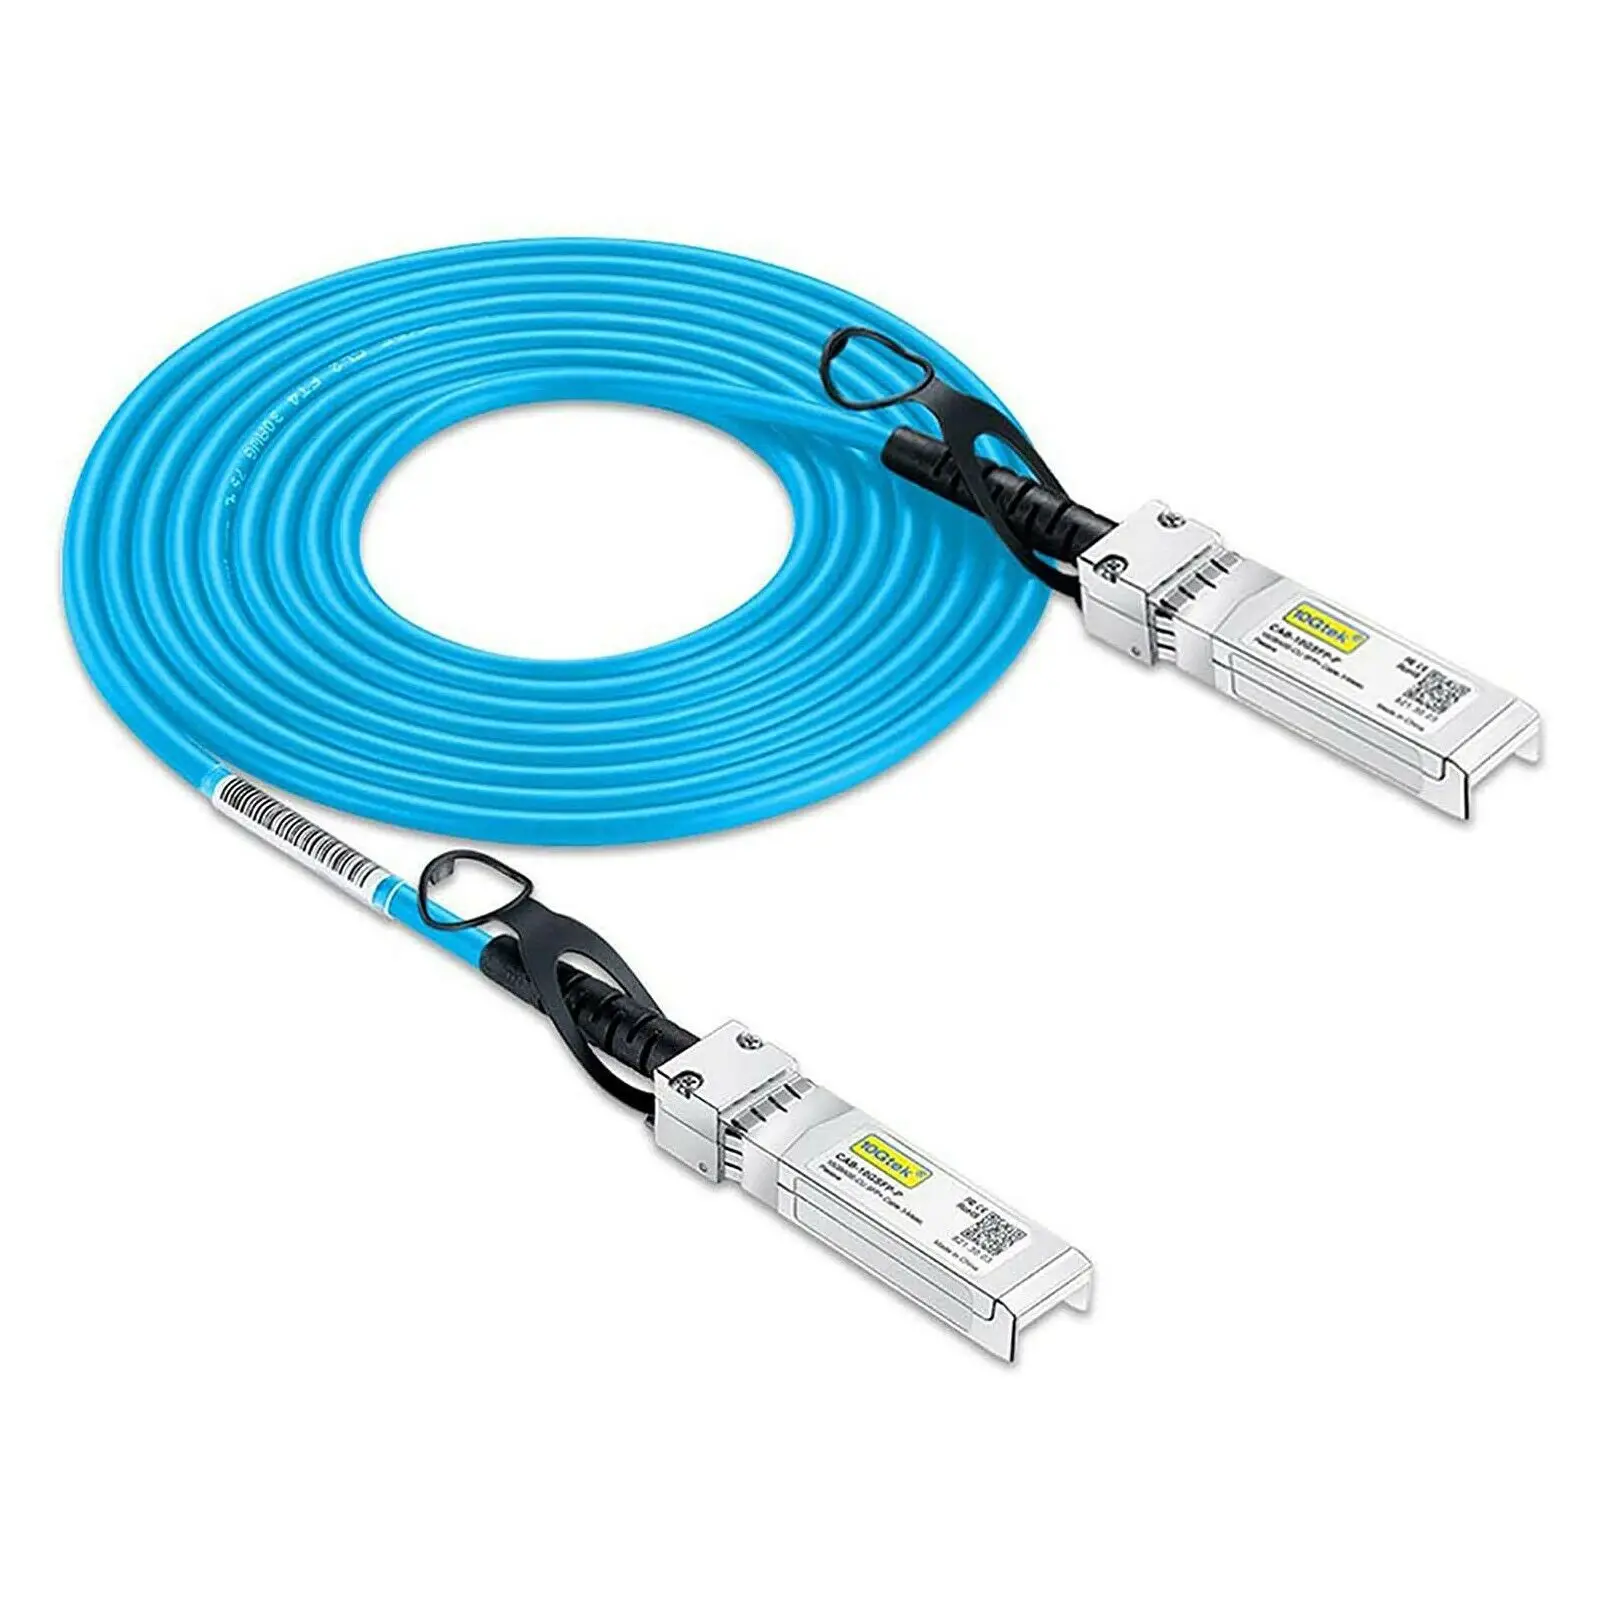 [Blue] Colored 10G SFP+ DAC Cable - Twinax SFP Cable for Cisco SFP-H10GB-CU1M, Arista, Ubiquiti,D-Link, Netgear,1-Meter(3.3ft) 2pcs 2 4g 5g d link 895l dual band 8 8 mimo omnidirectional antenna 3 frequency 5300mhz for asus netgear linksys tp link router